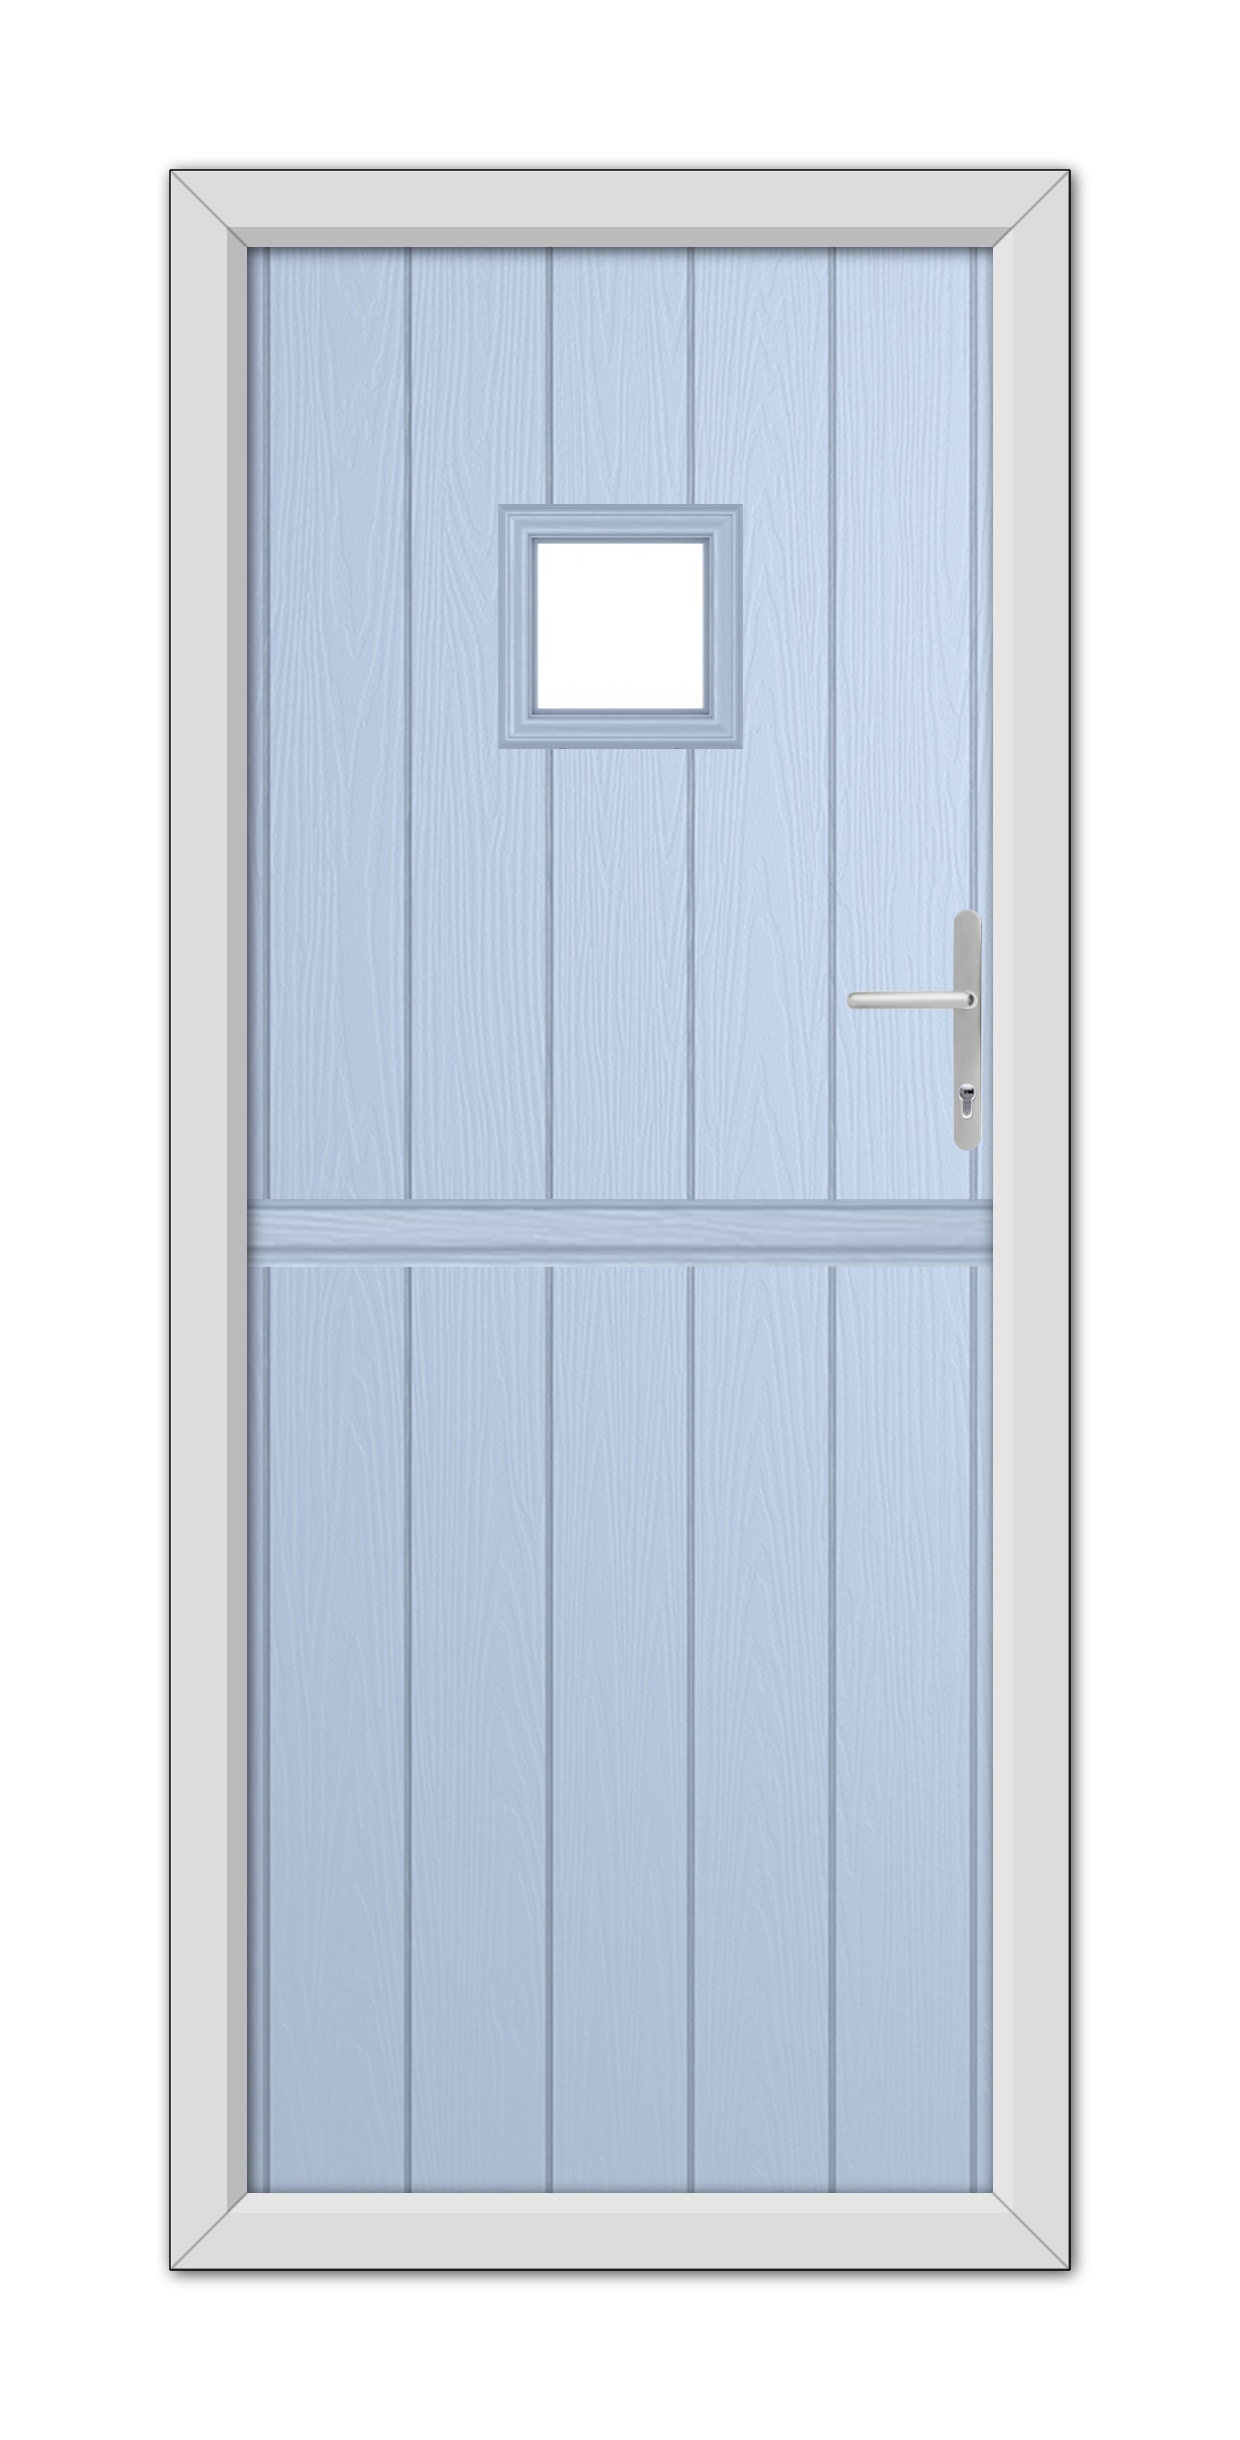 A Duck Egg Blue Brampton Stable Composite Door 48mm Timber Core with a small square window at the top, featuring a stainless steel handle and frame.